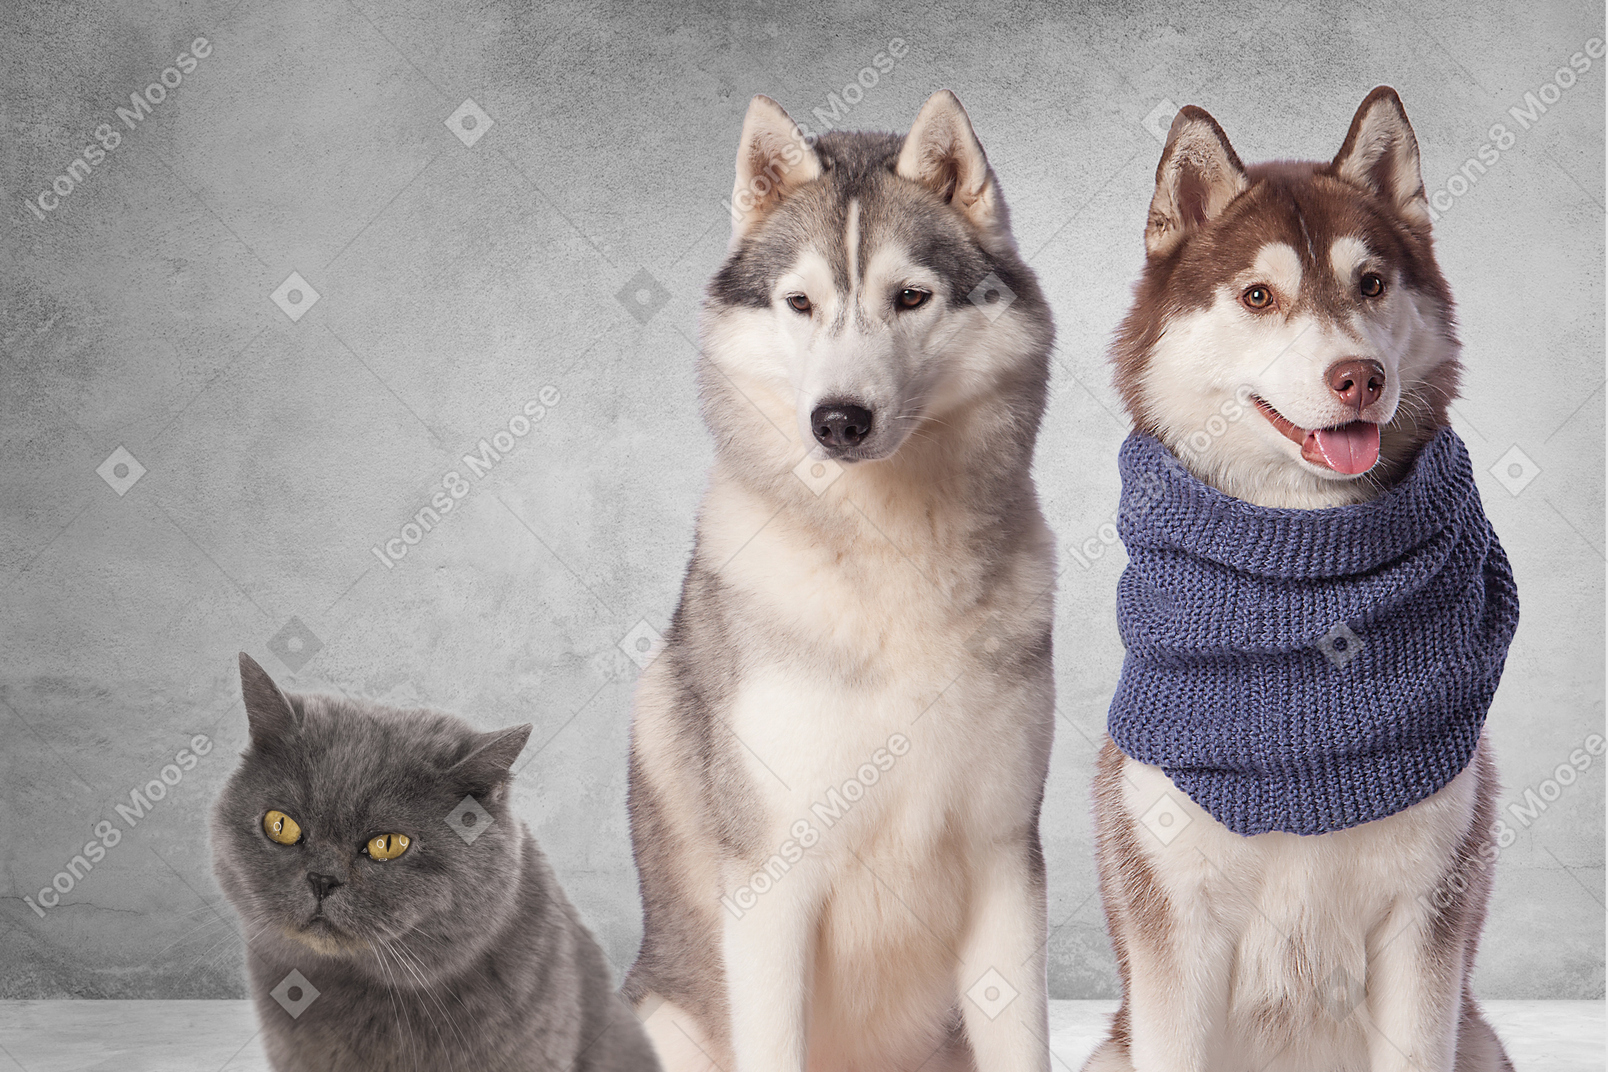 Two huskies and a british shorthaired cat